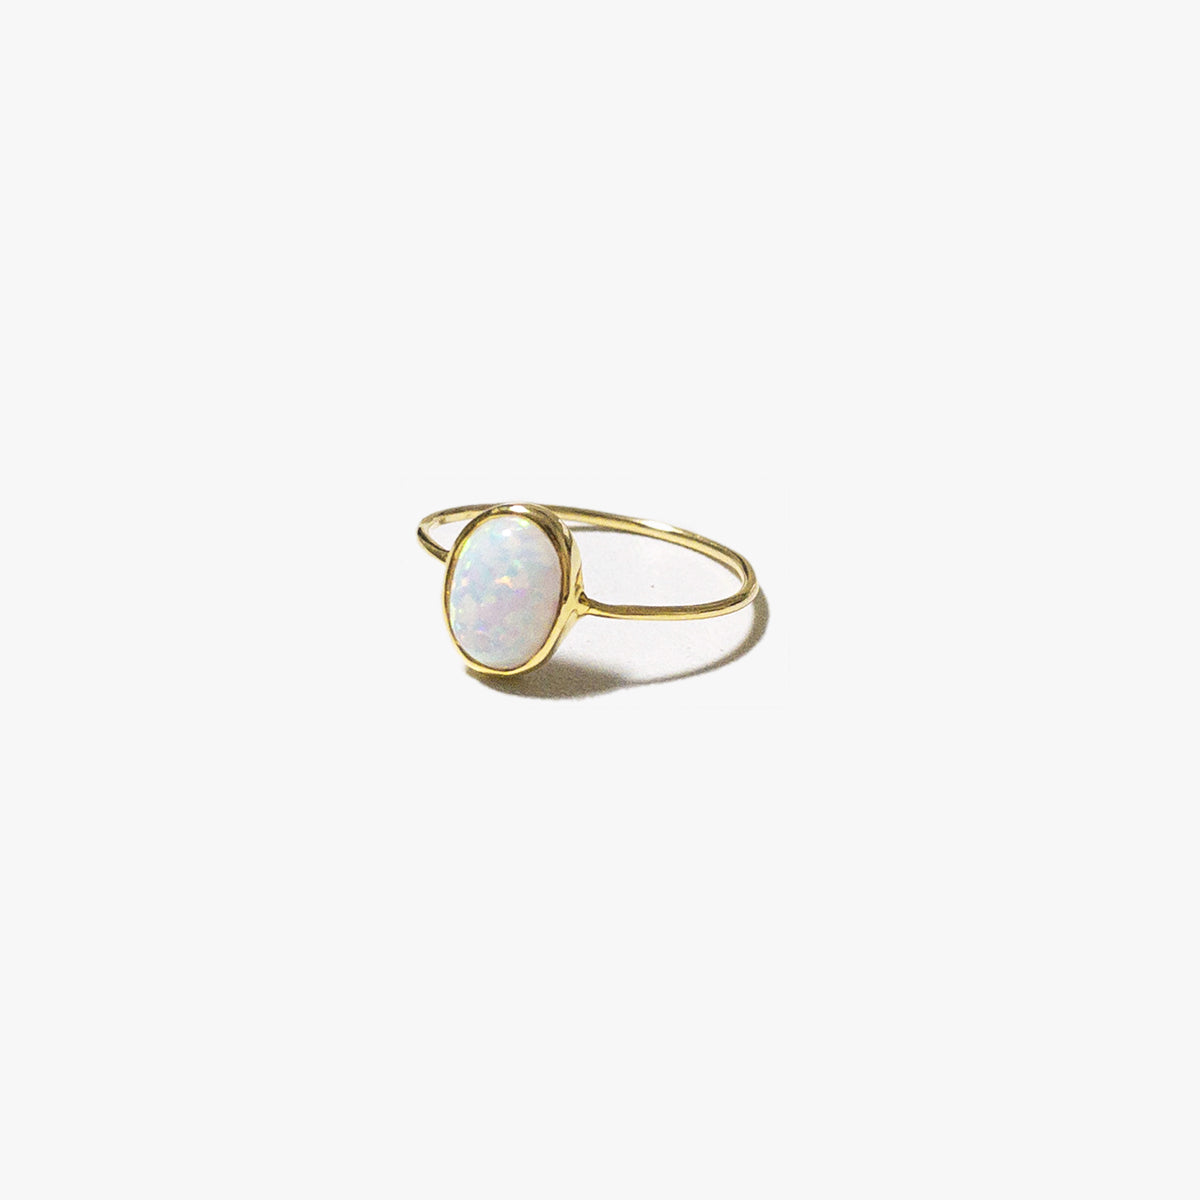 The Rare Opal Ring in Solid Gold